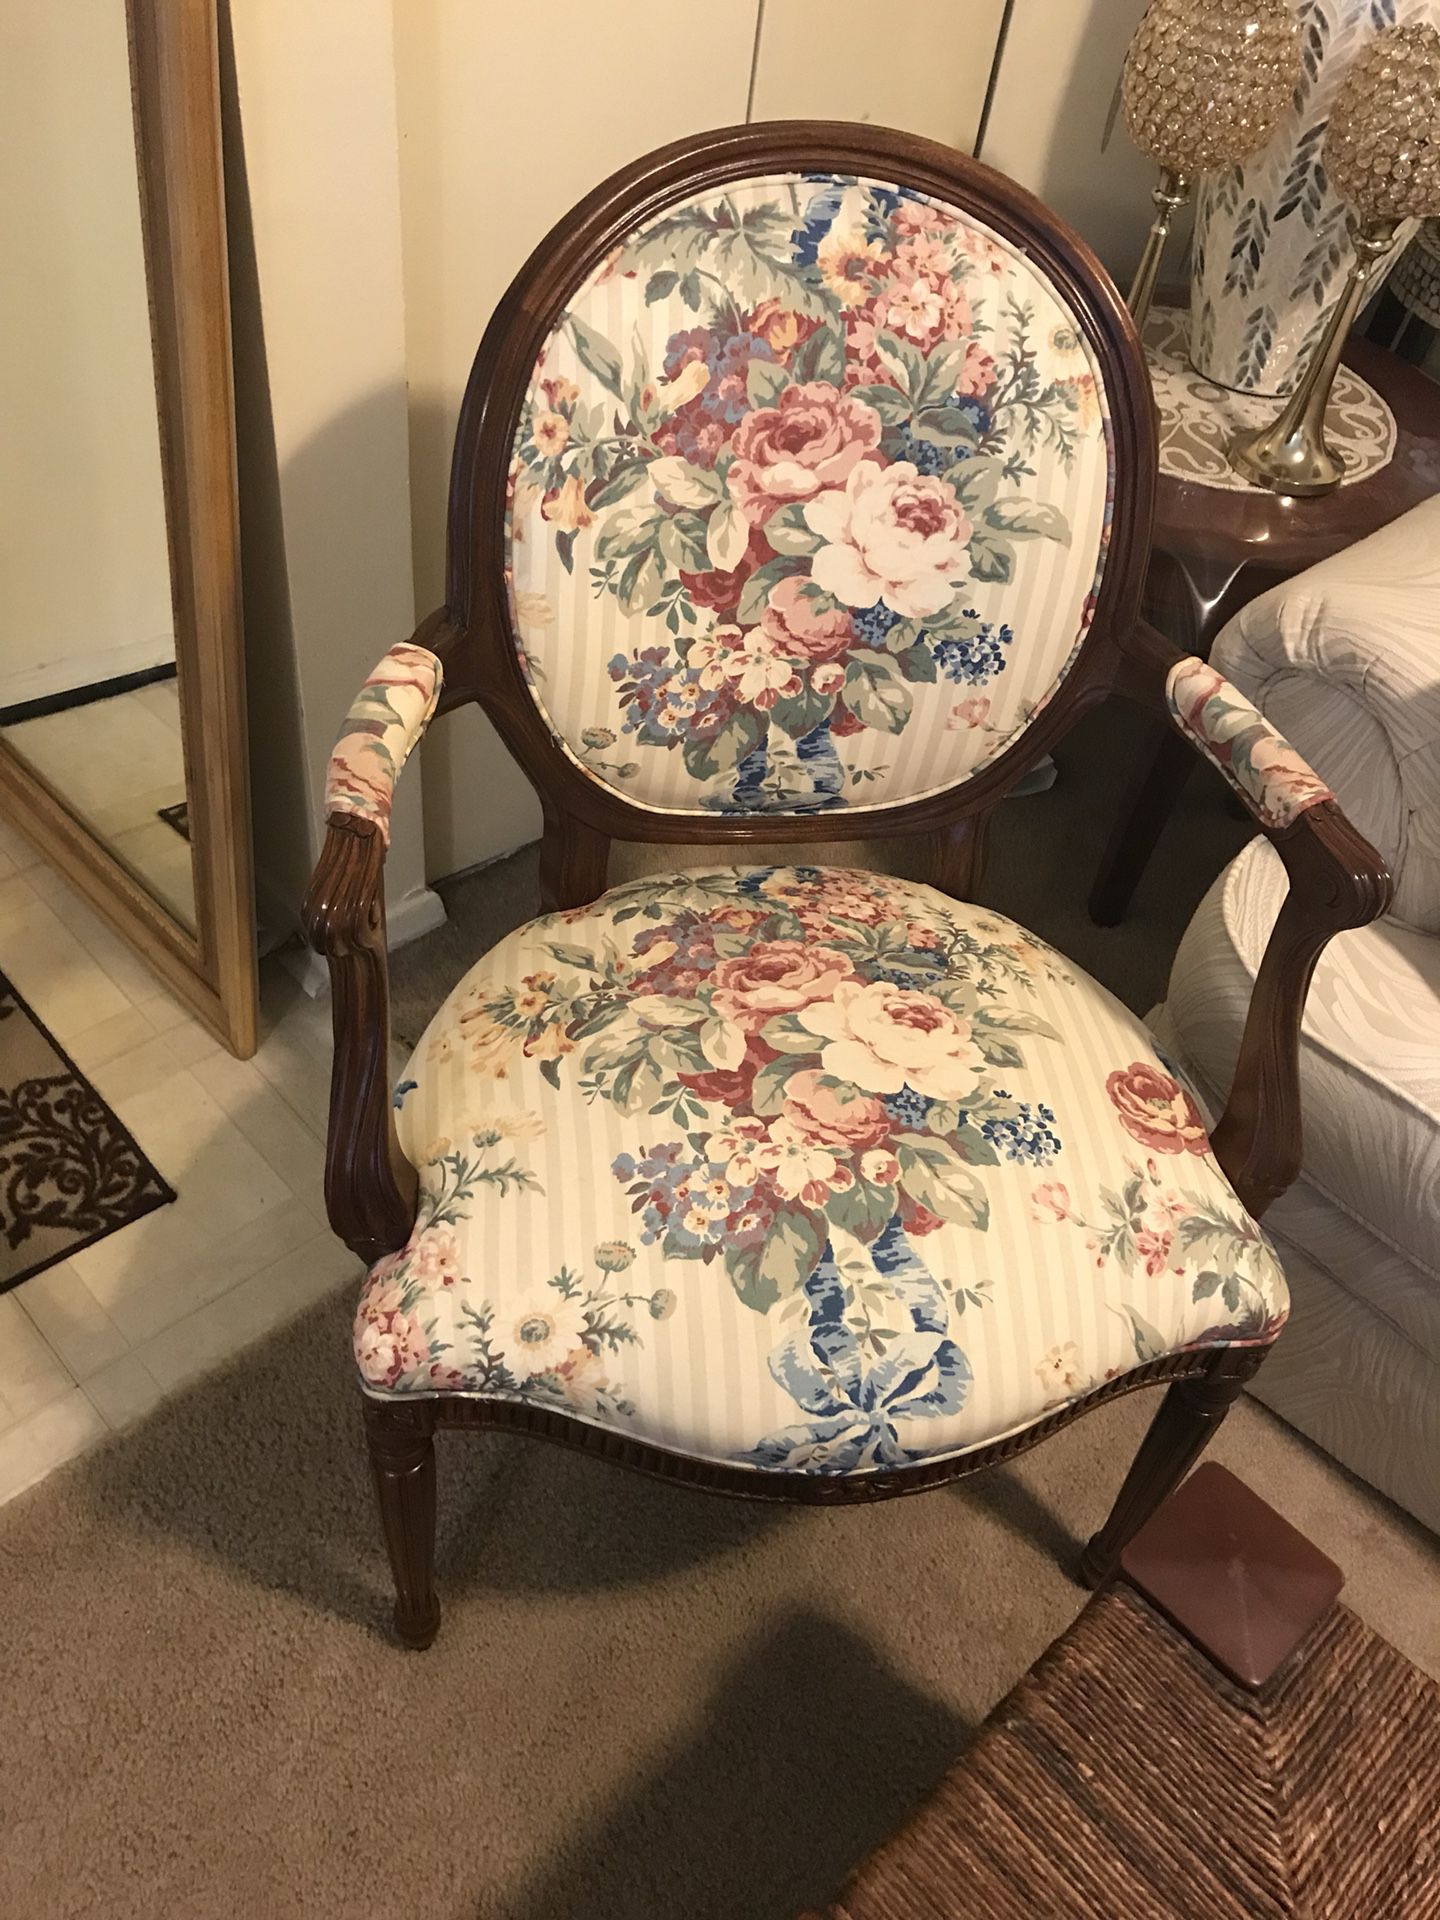 2 arm chairs heavy wood click on my profile picture on this page to check out my other items pm me if you interested gaithersburg md 20877